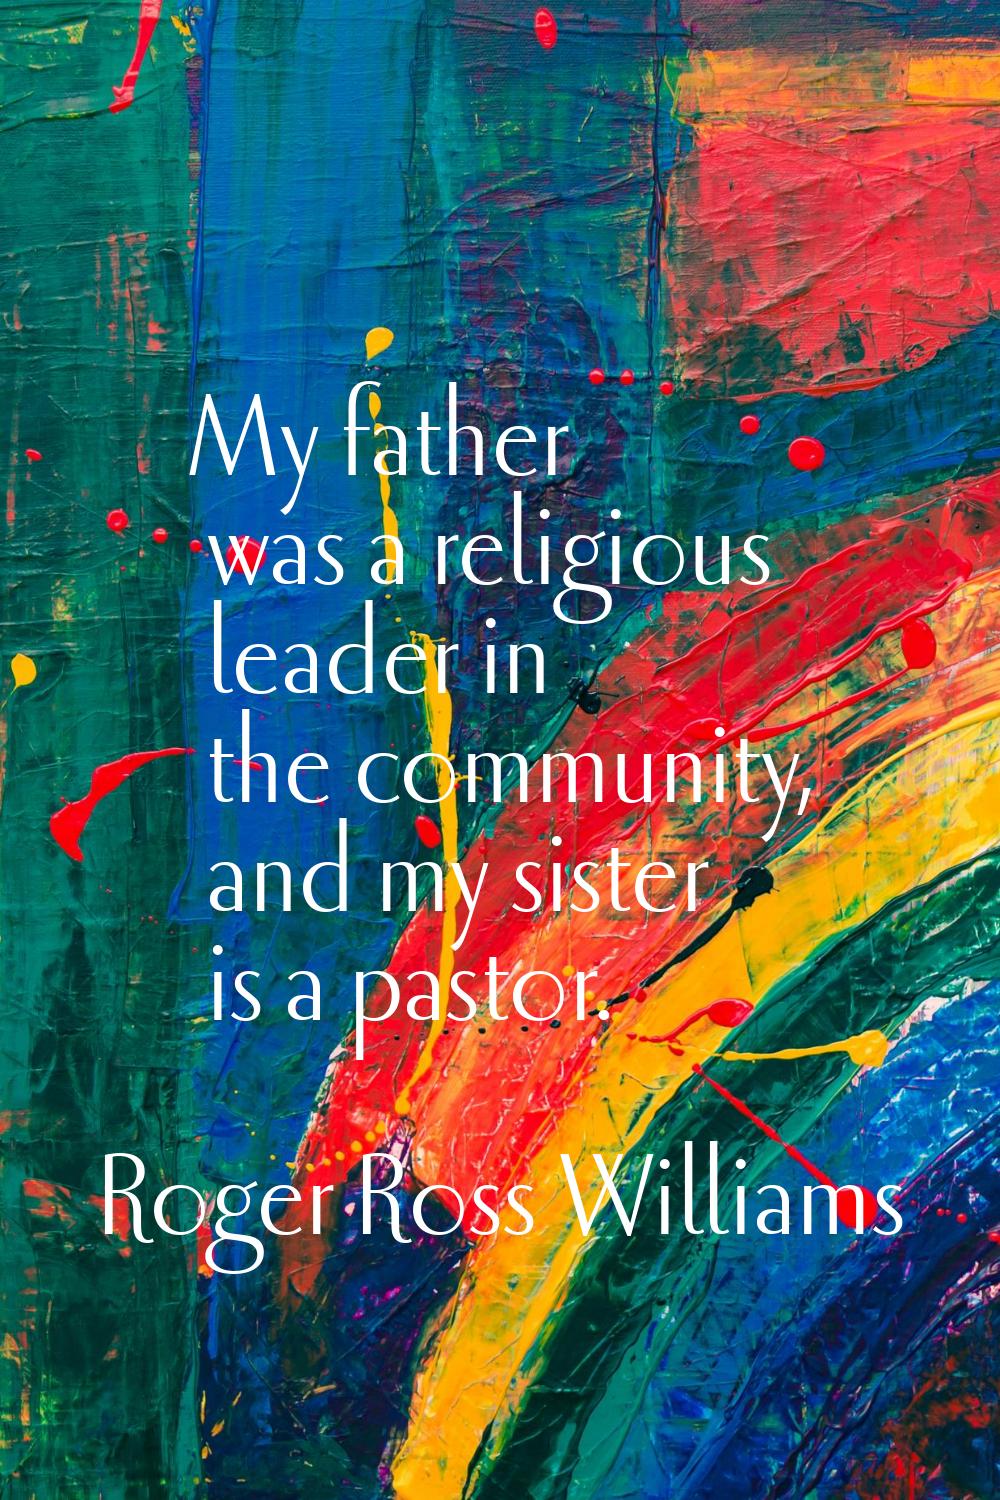 My father was a religious leader in the community, and my sister is a pastor.